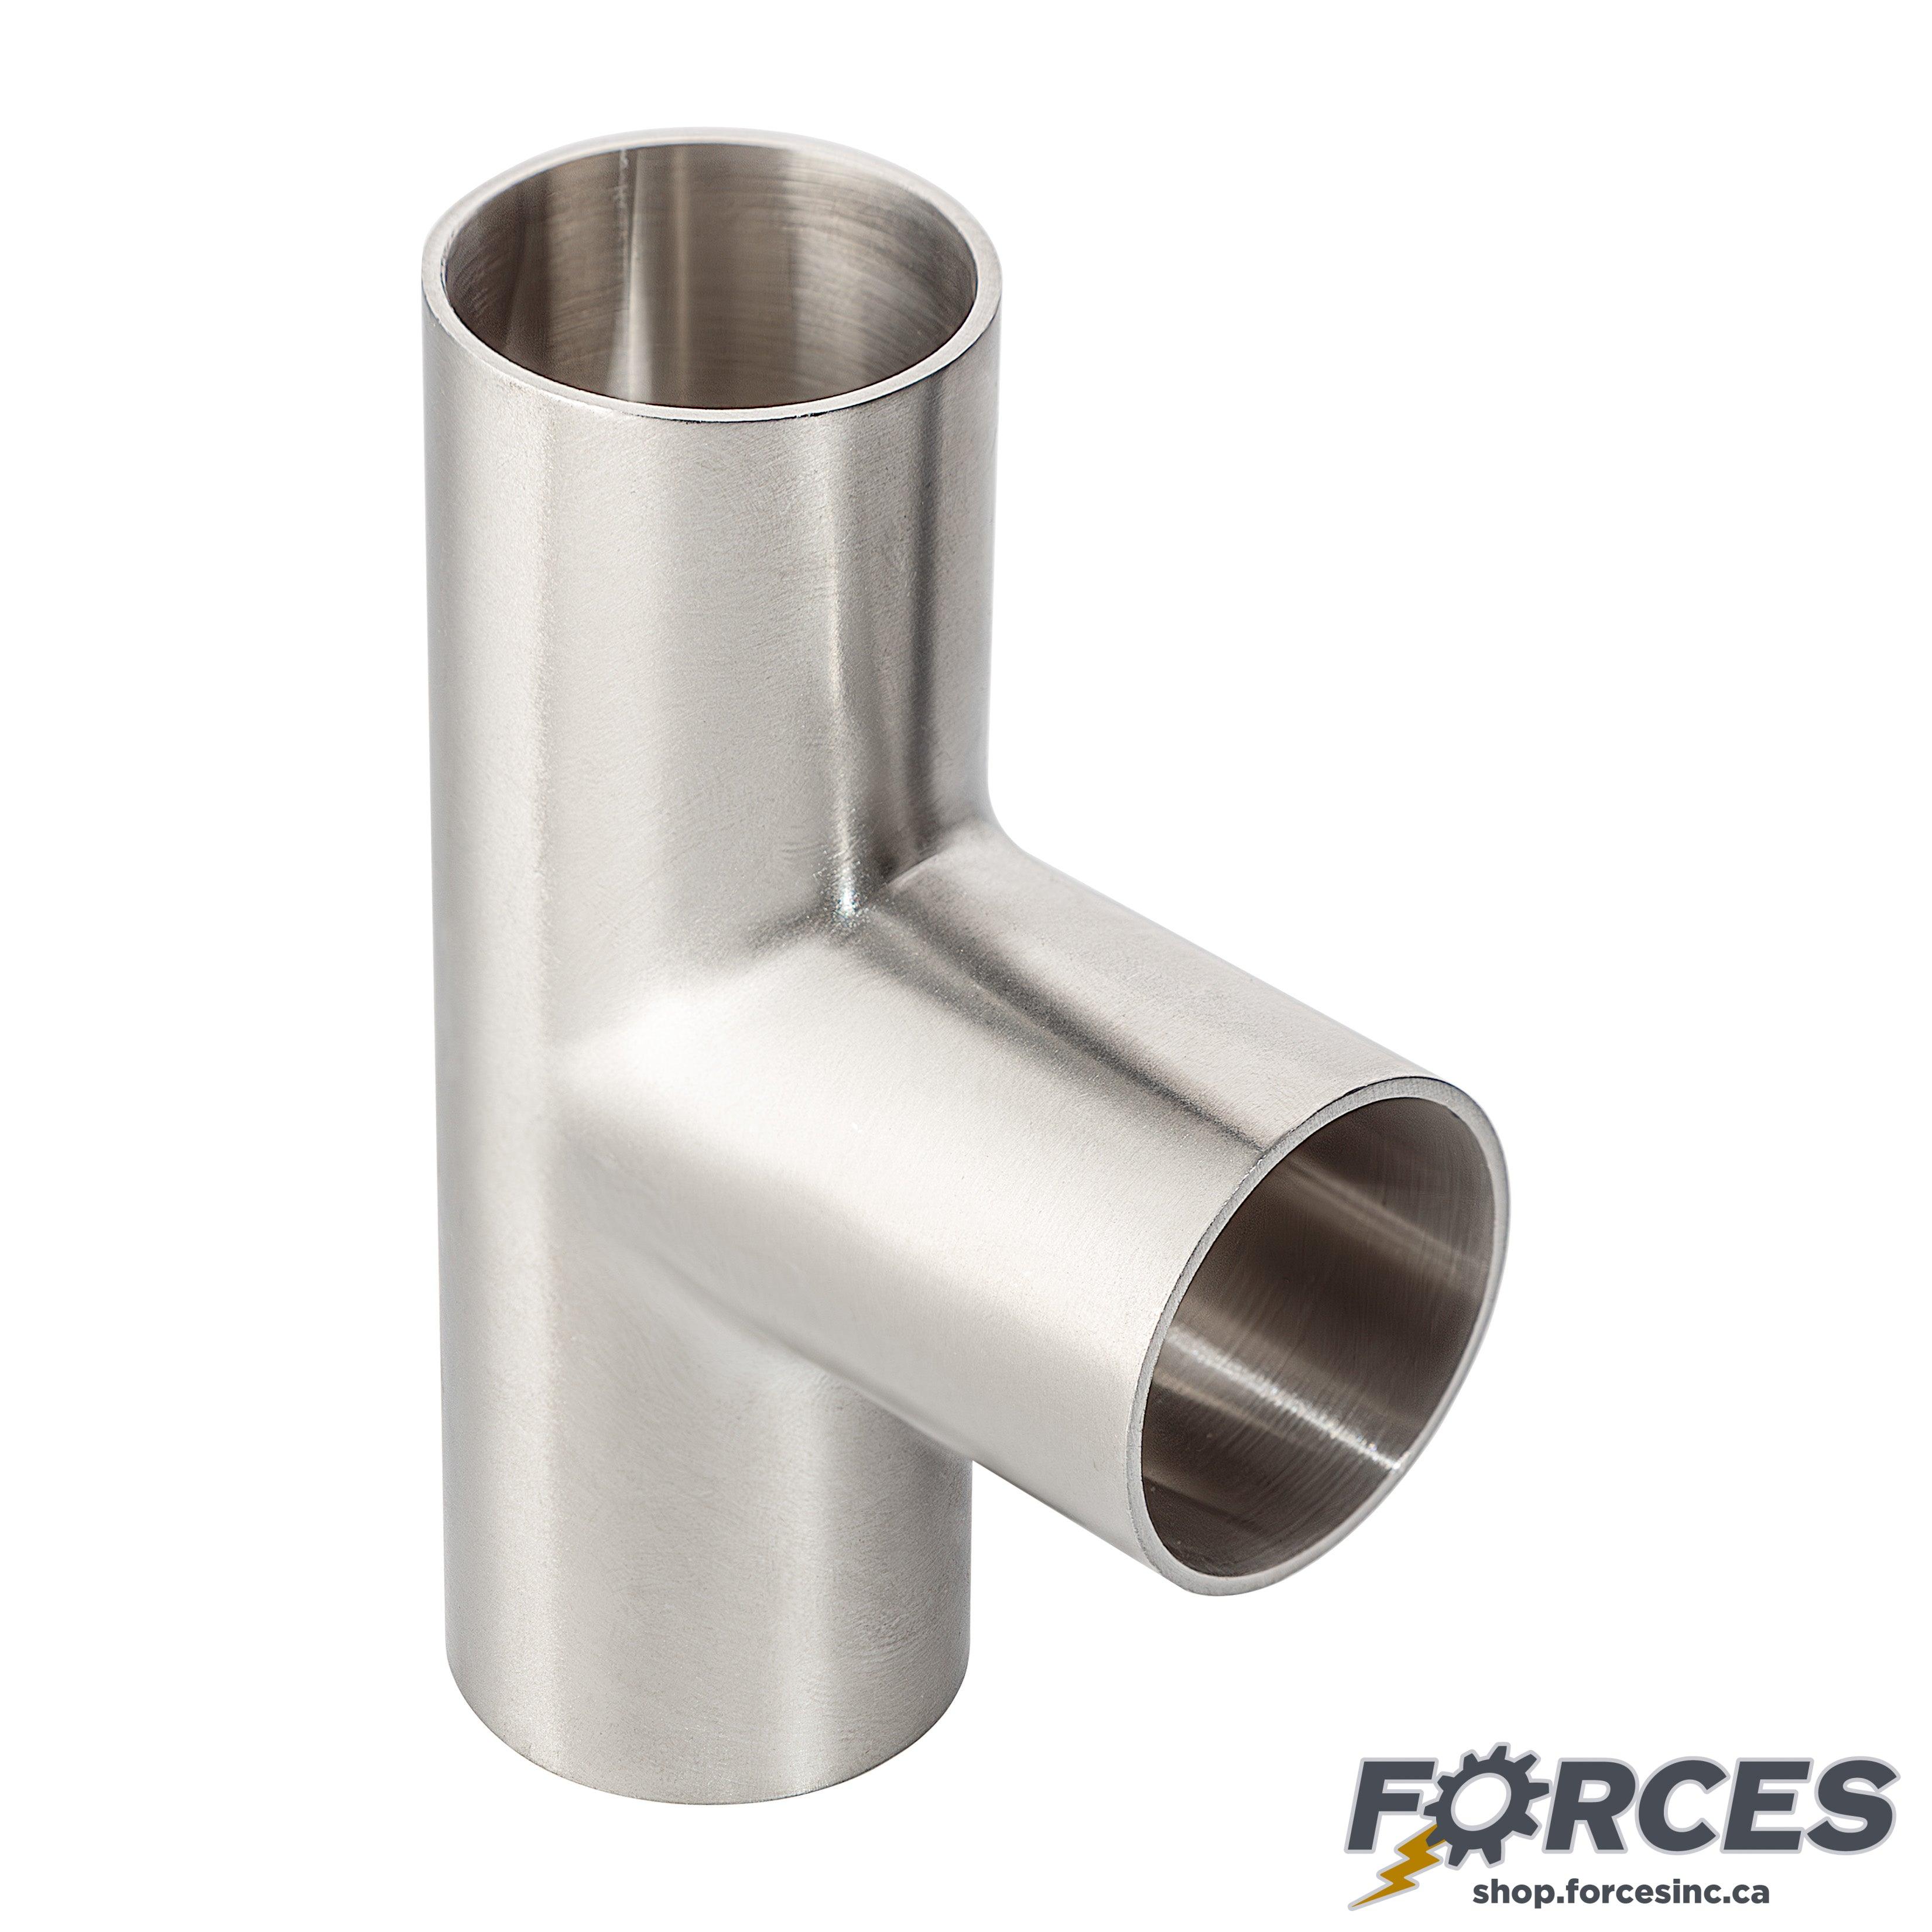 2" Butt Weld Long Tee - Stainless Steel 316 - Forces Inc